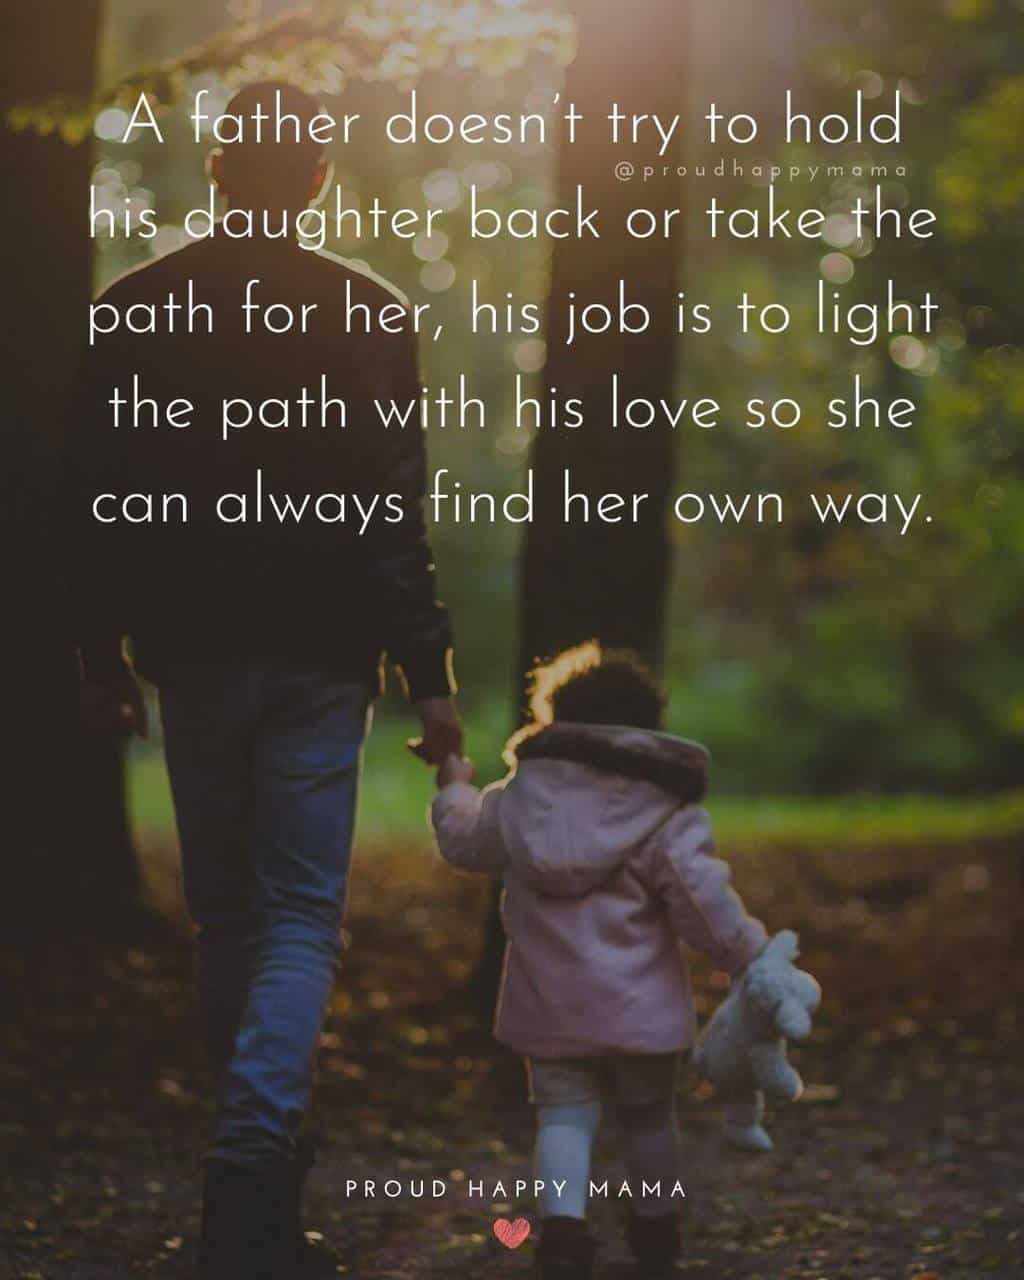 150 Best Dad And Daughter Quotes And Sayings [heartfelt]